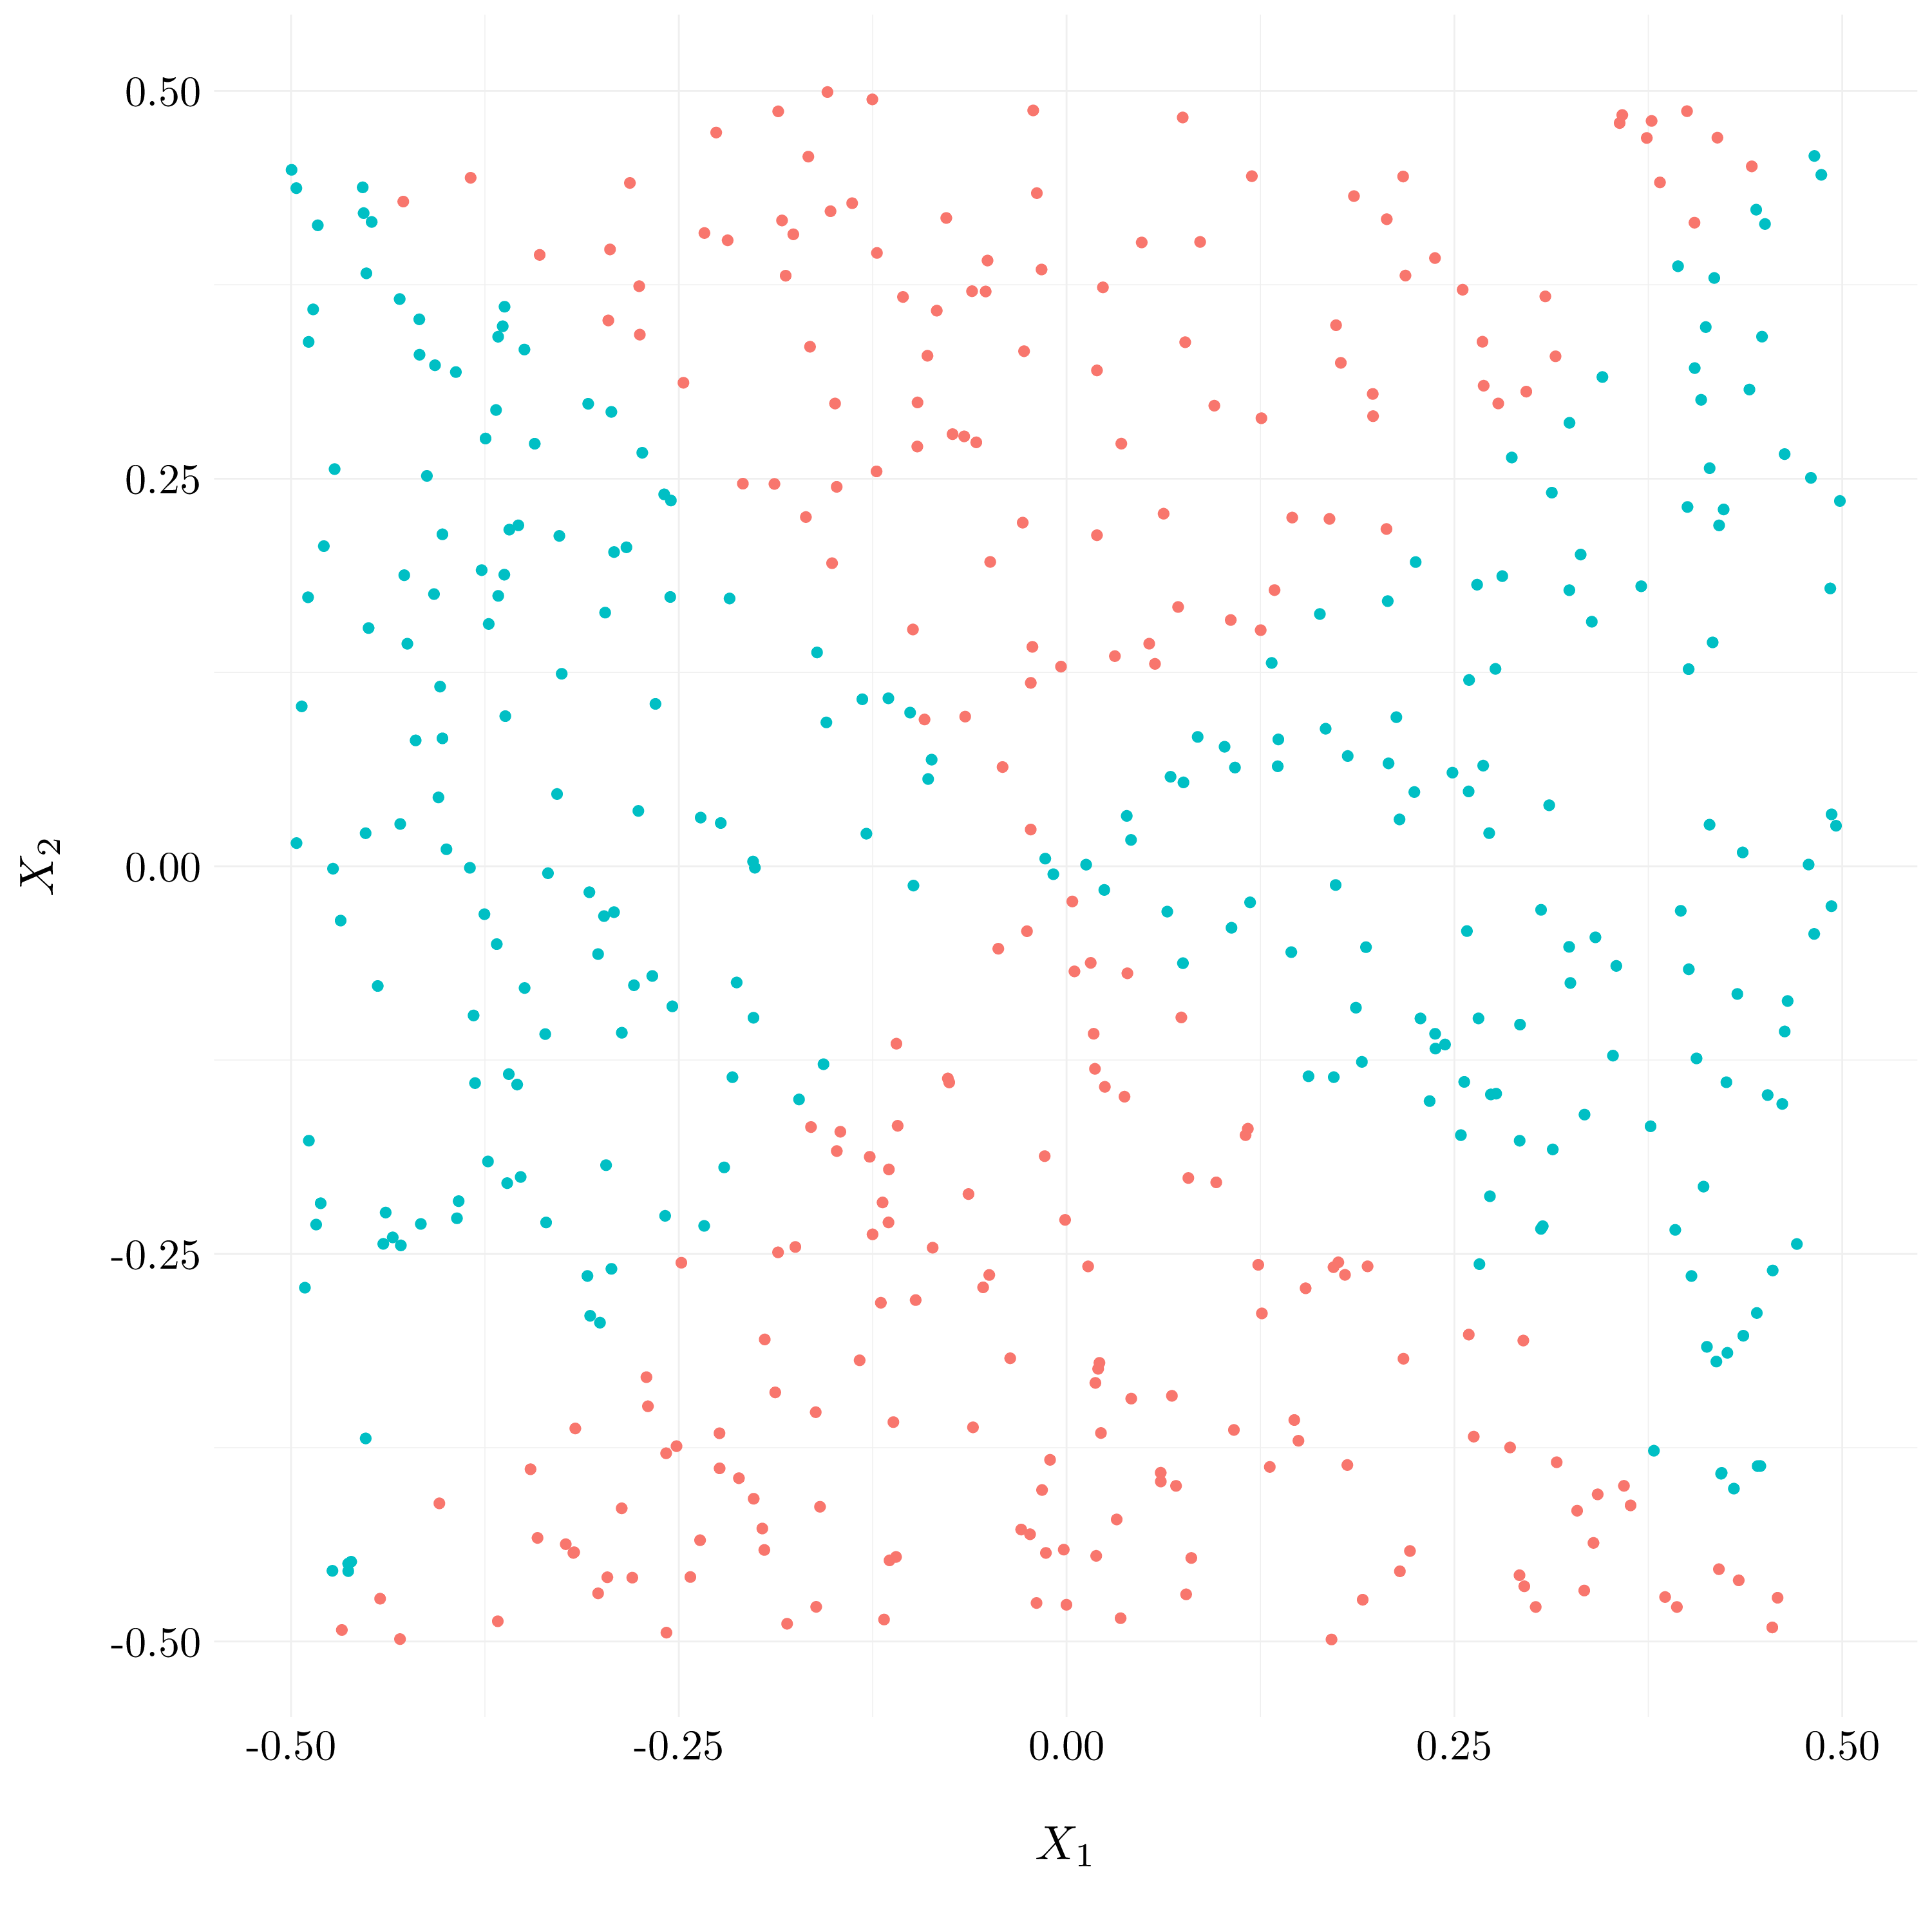 Plot of the observations with true classes